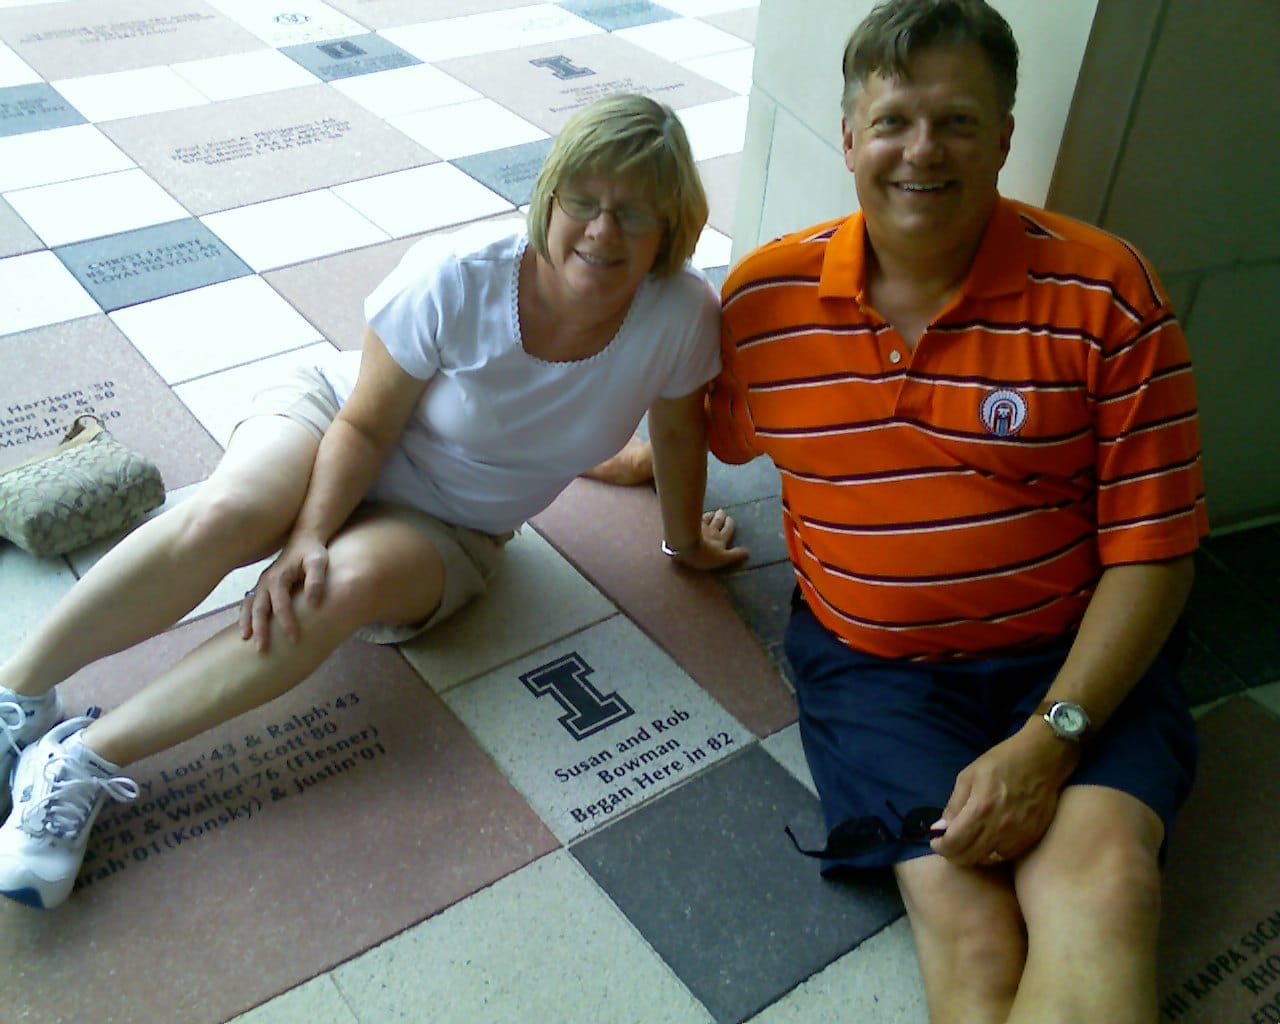 Rob and Susan Korte posing with a university tile where they first met.